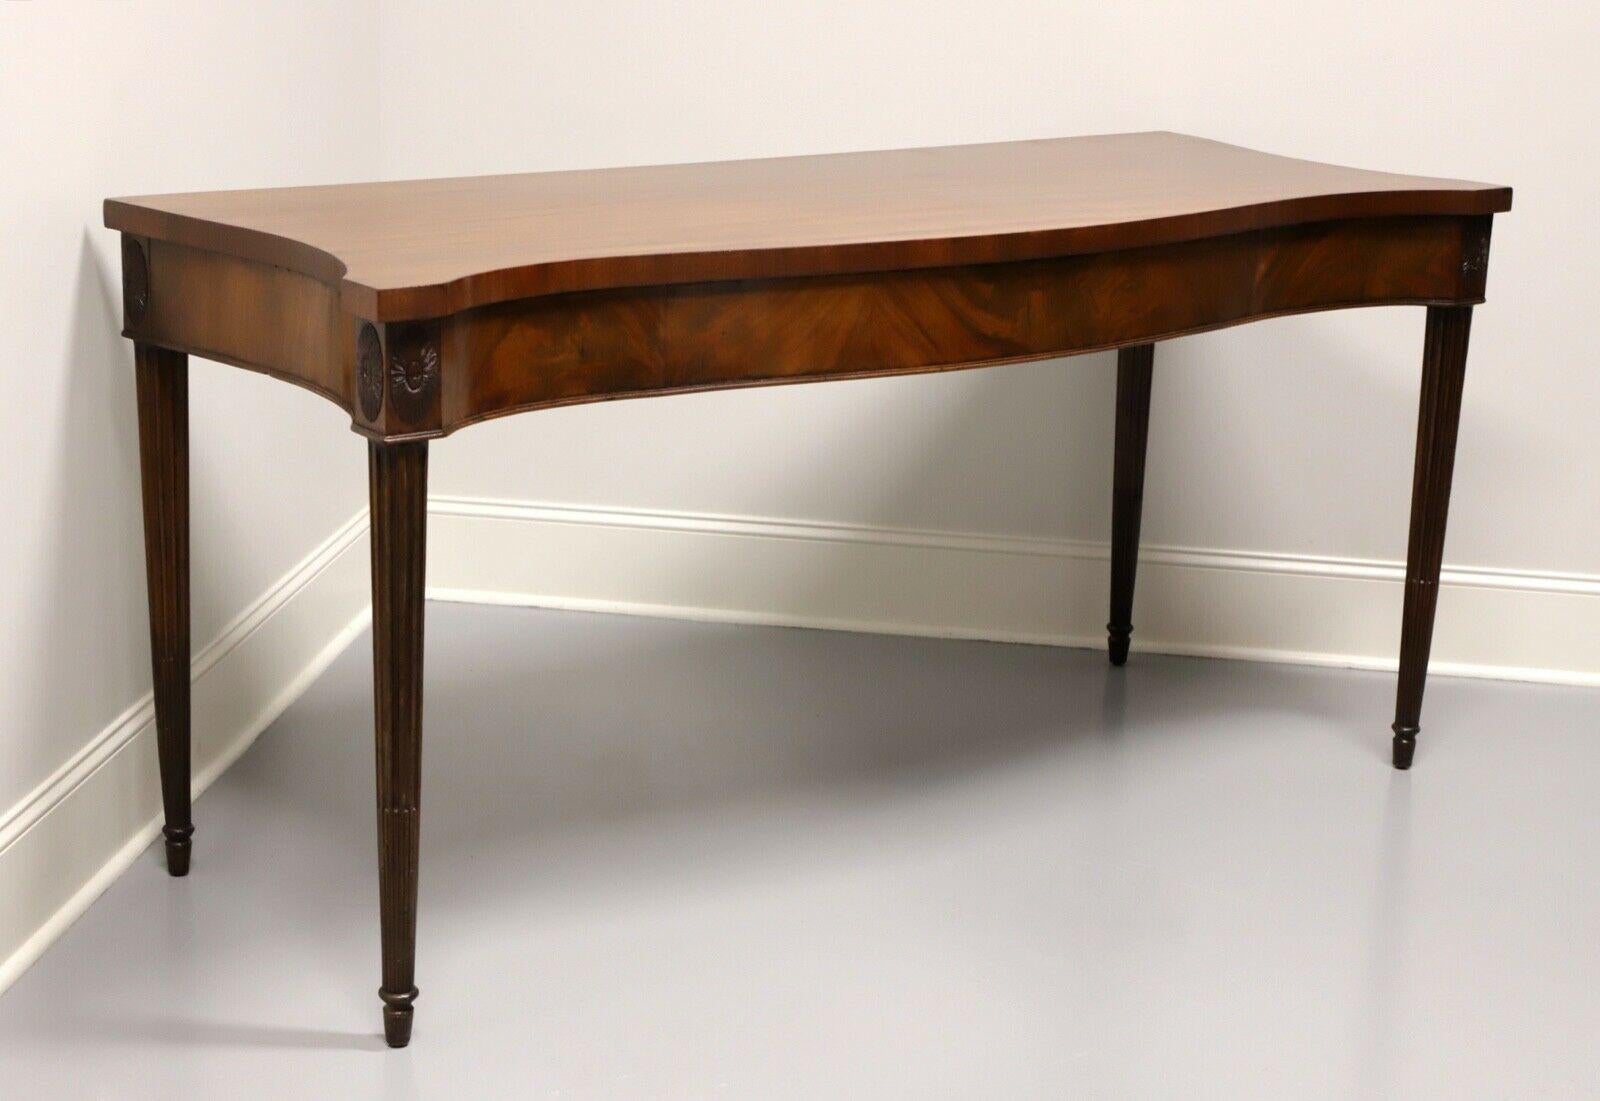 An antique George III style serpentine serving table, no makers mark. Made circa 1800, possibly in England or the USA. Mahogany with flame mahogany veneers to front of apron. Features extra deep top, serpentine front, carved medallions to knees and